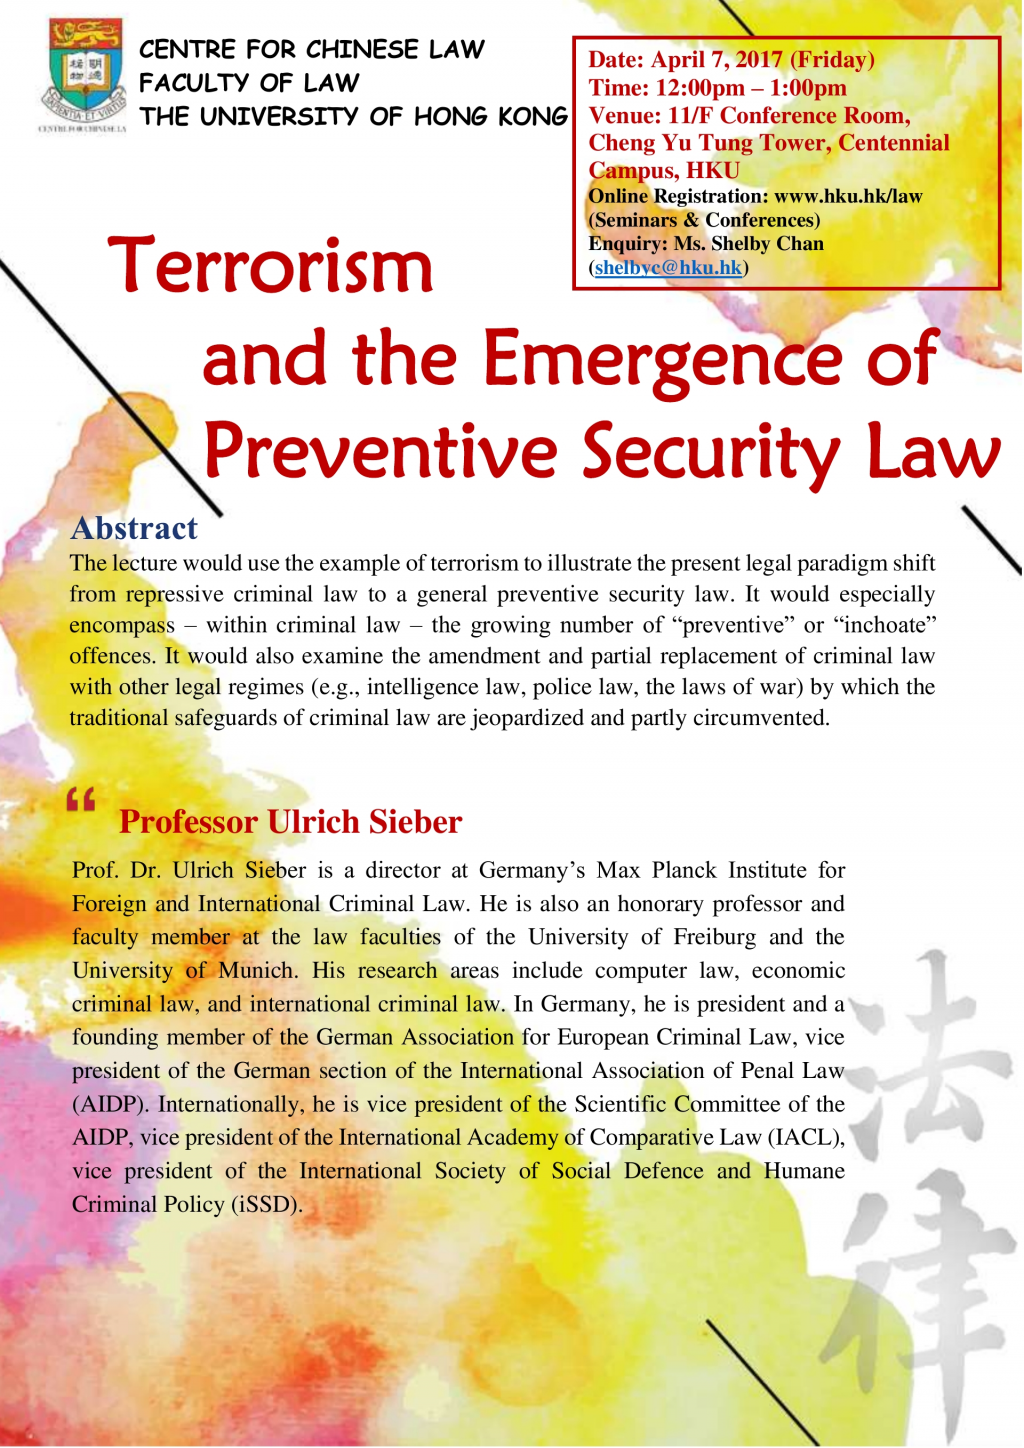 Terrorism and the Emergence of Preventive Security Law